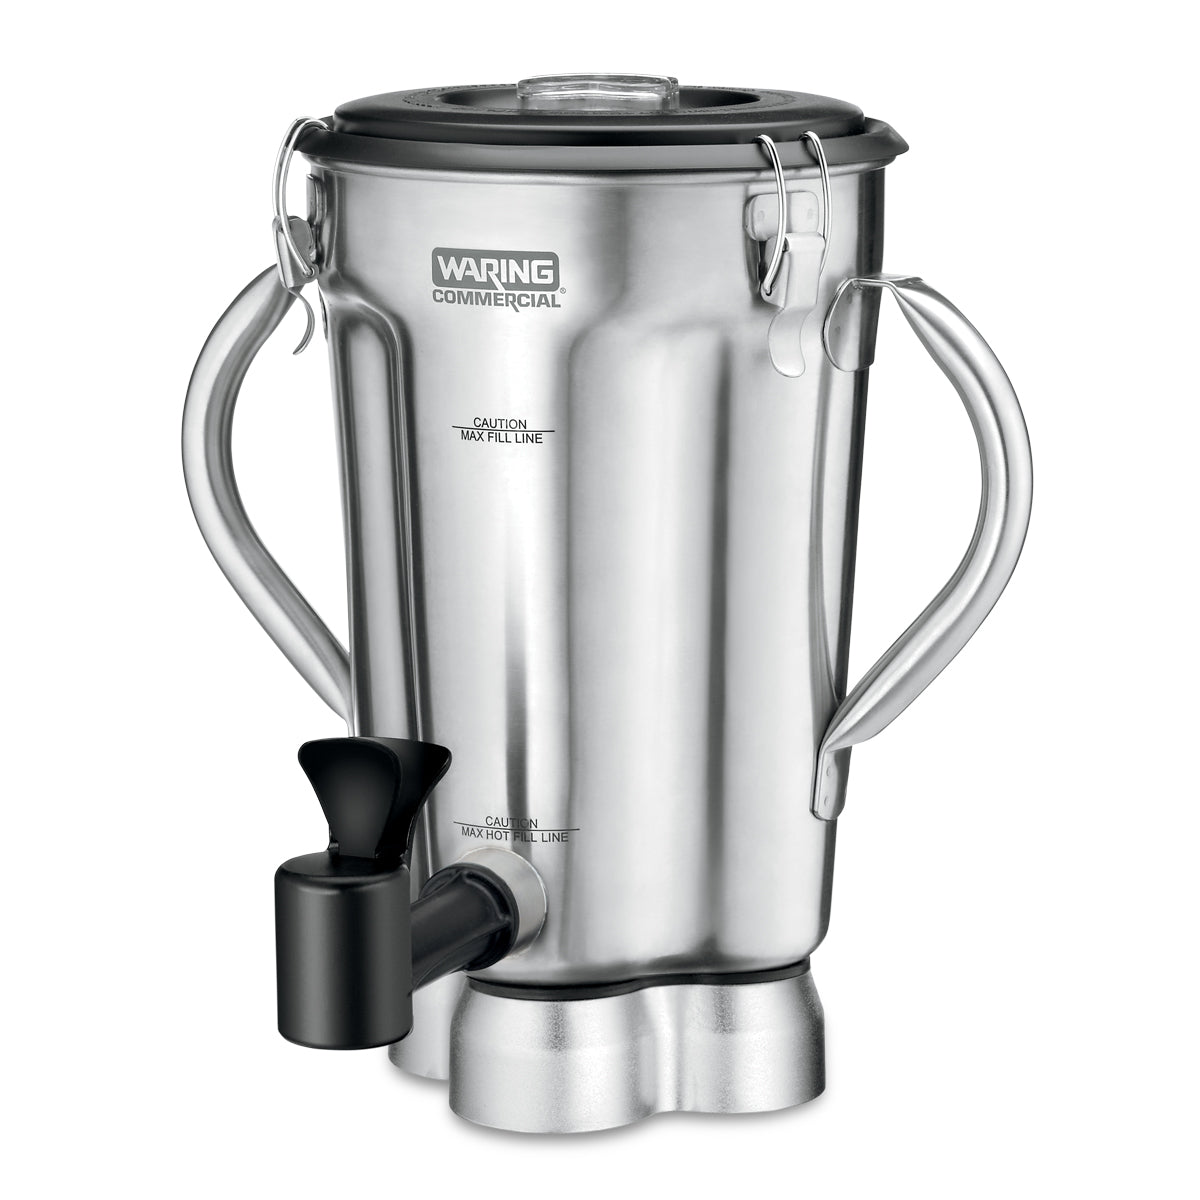 CAC125 - Stainless Steel Blender Container